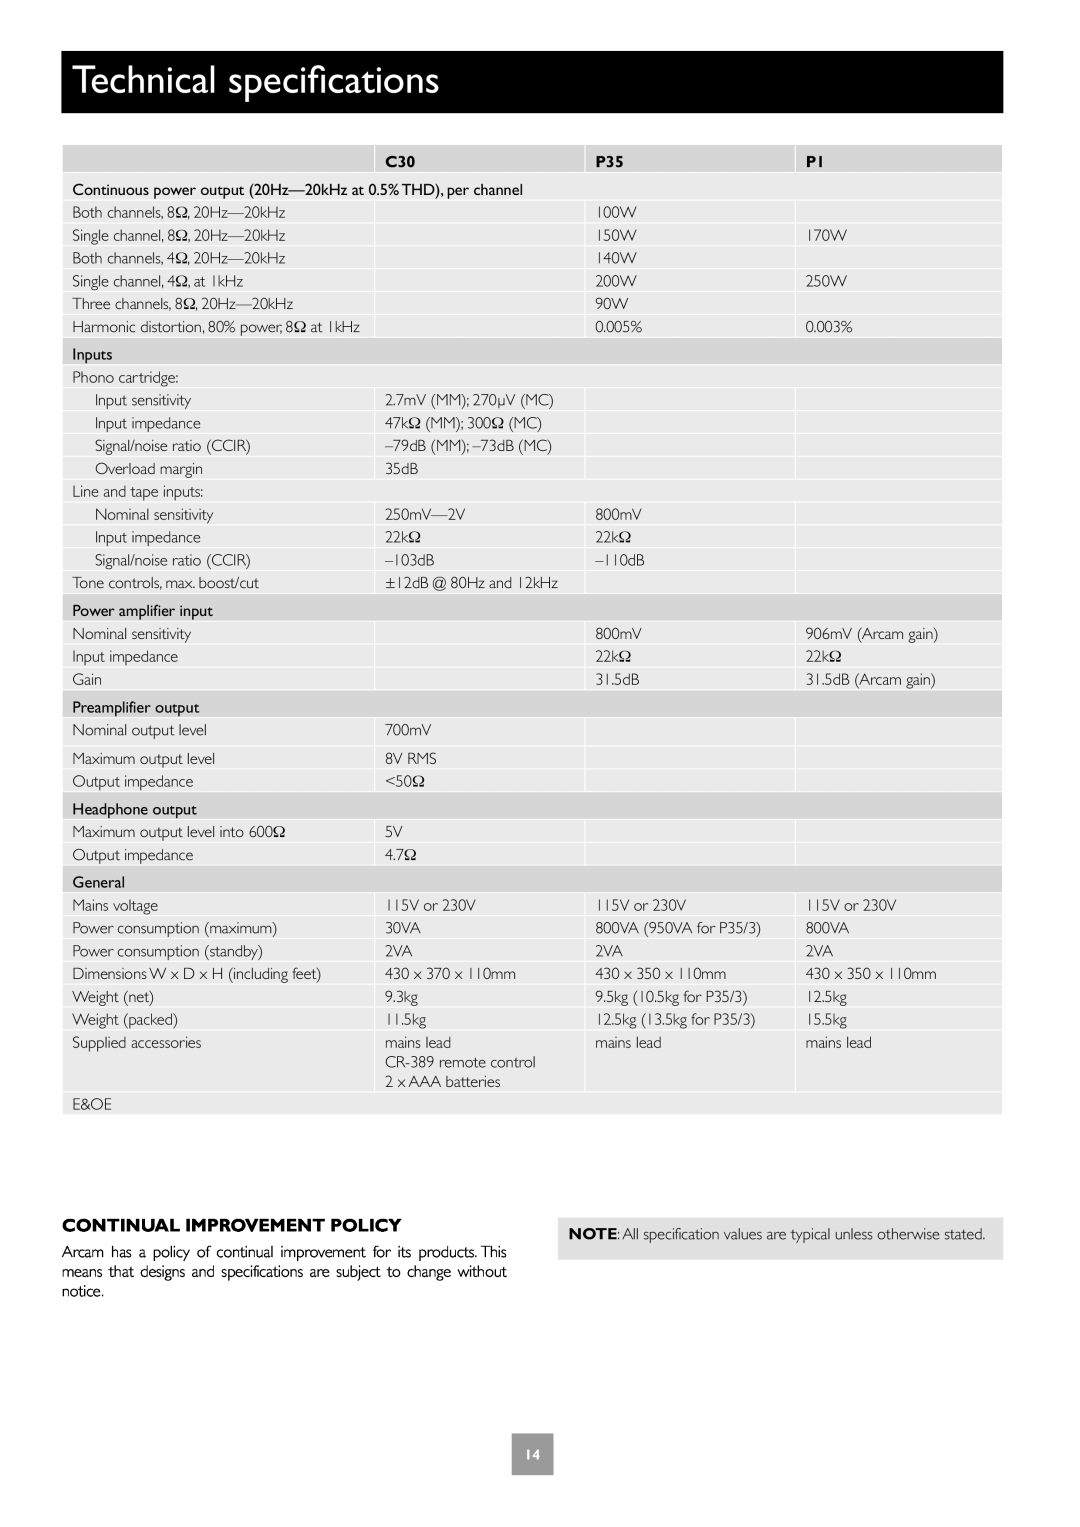 Arcam C30, P35, P1 manual Technical specifications, Continual Improvement Policy 